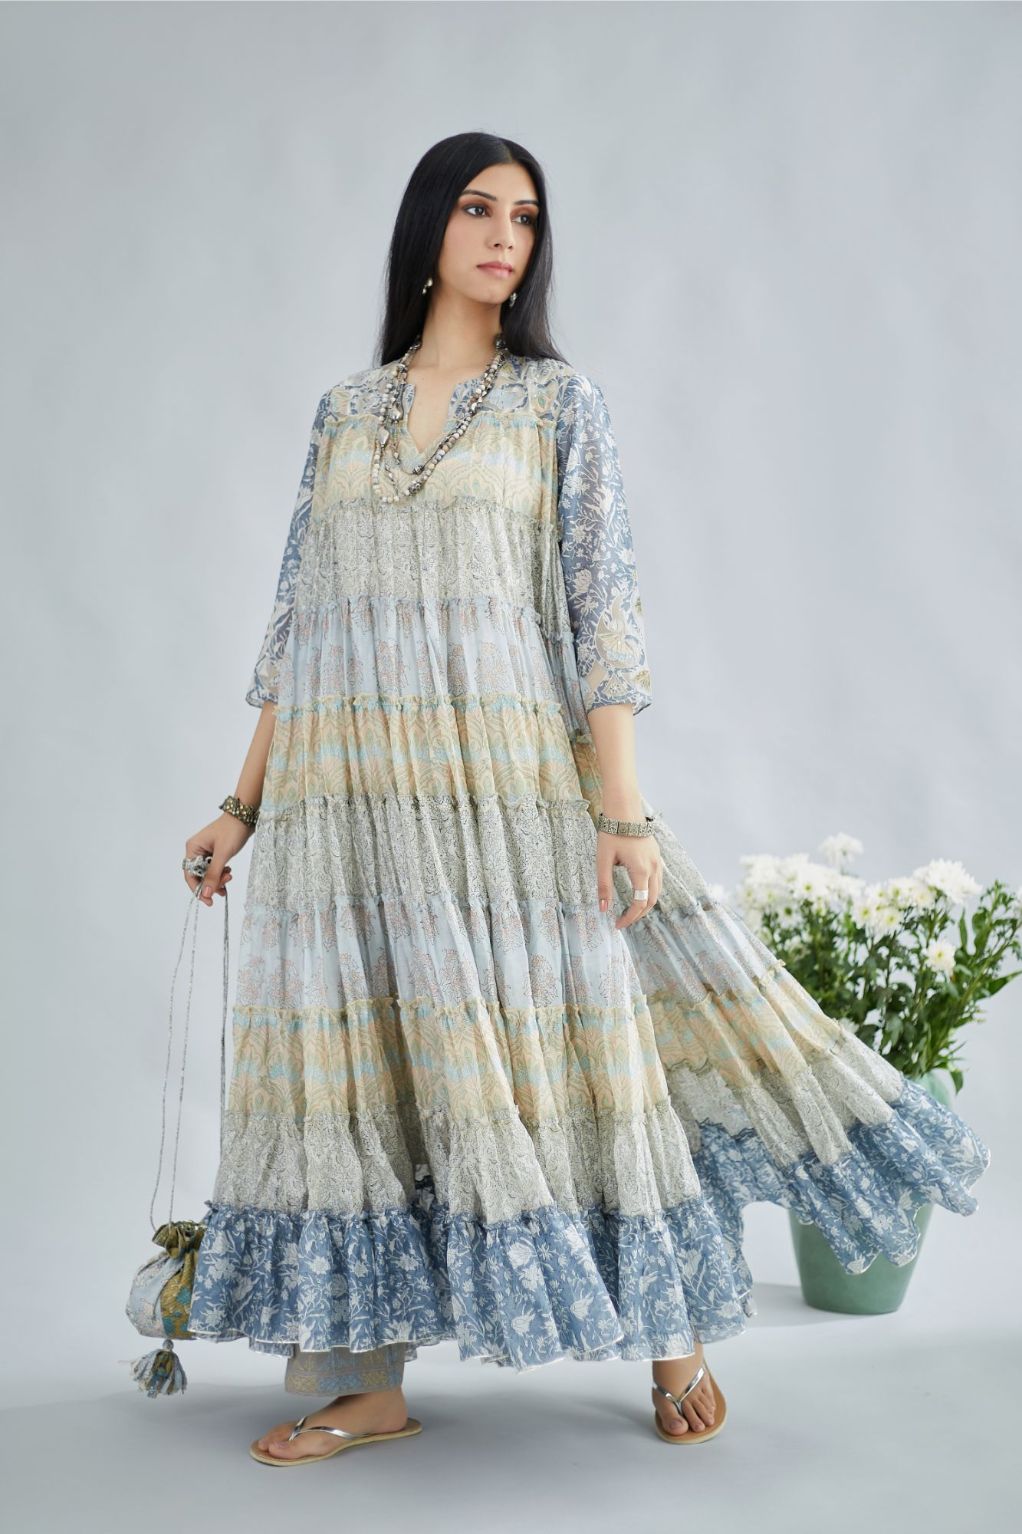 Hand block printed multi-tiered kurta set dress with 3/4 sleeves and cutwork detailing